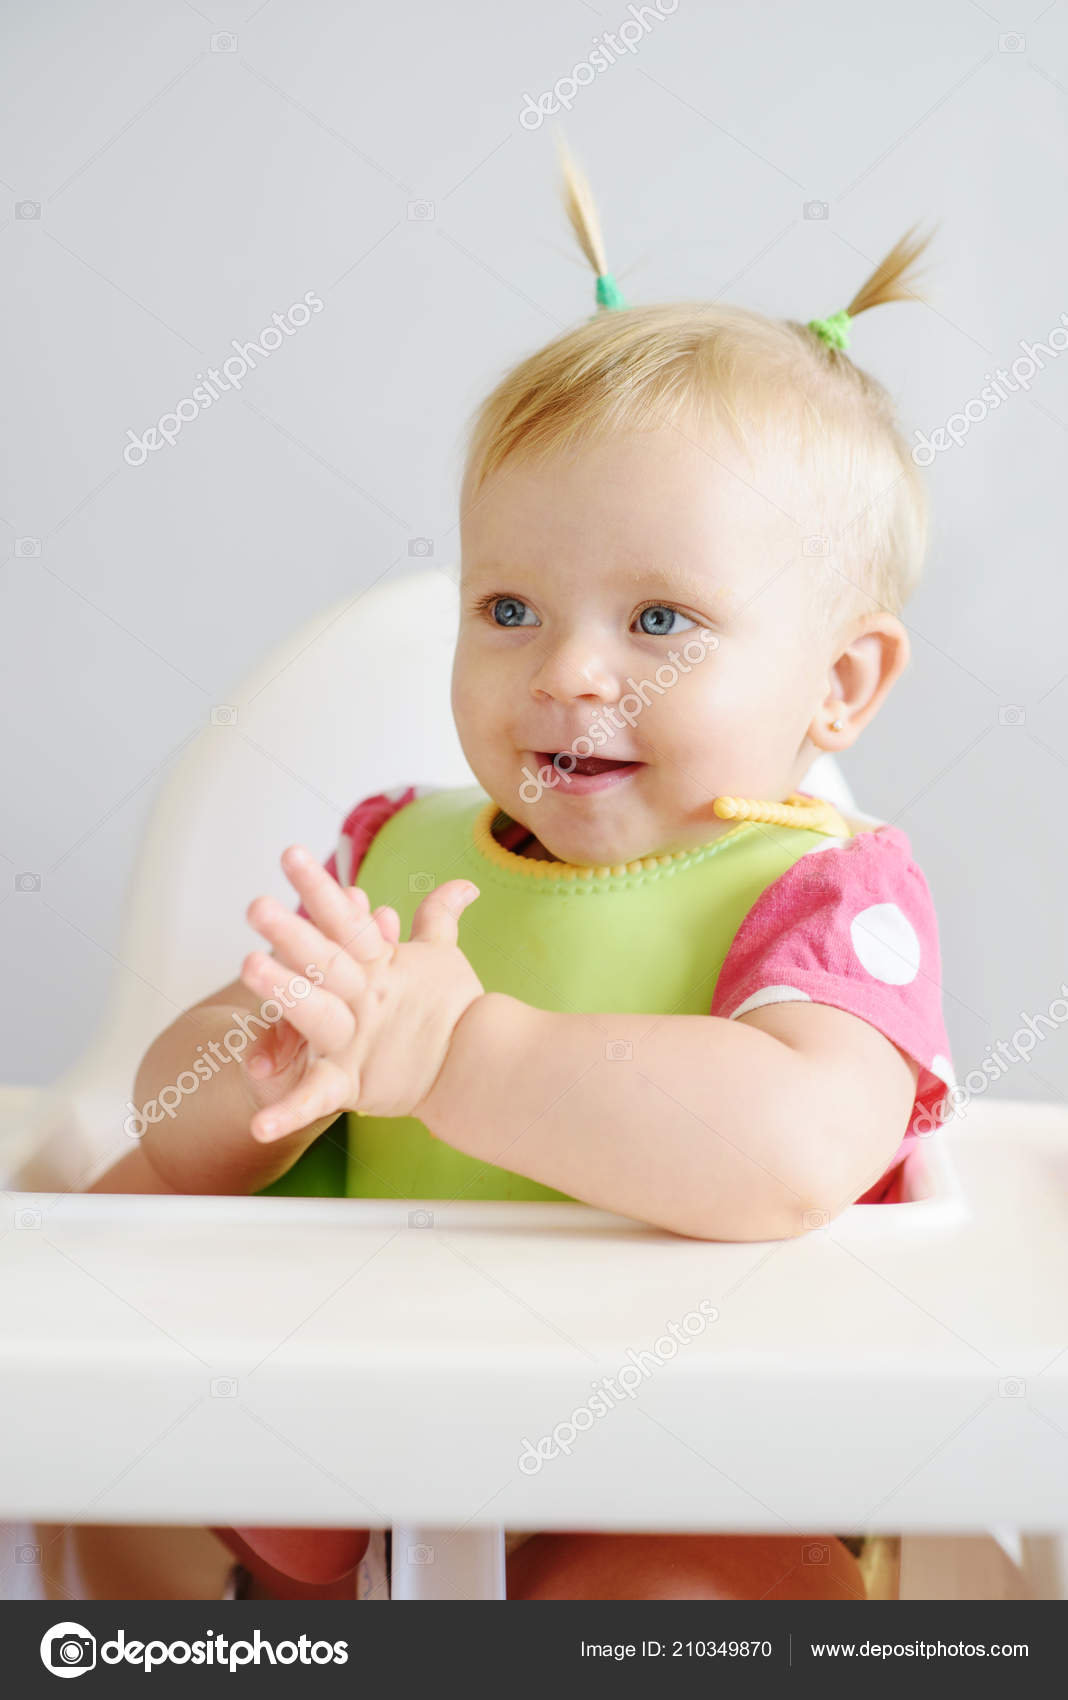 Cheerful Baby Girl Her First Hairstyle Home Stock Photo C Reanas 210349870